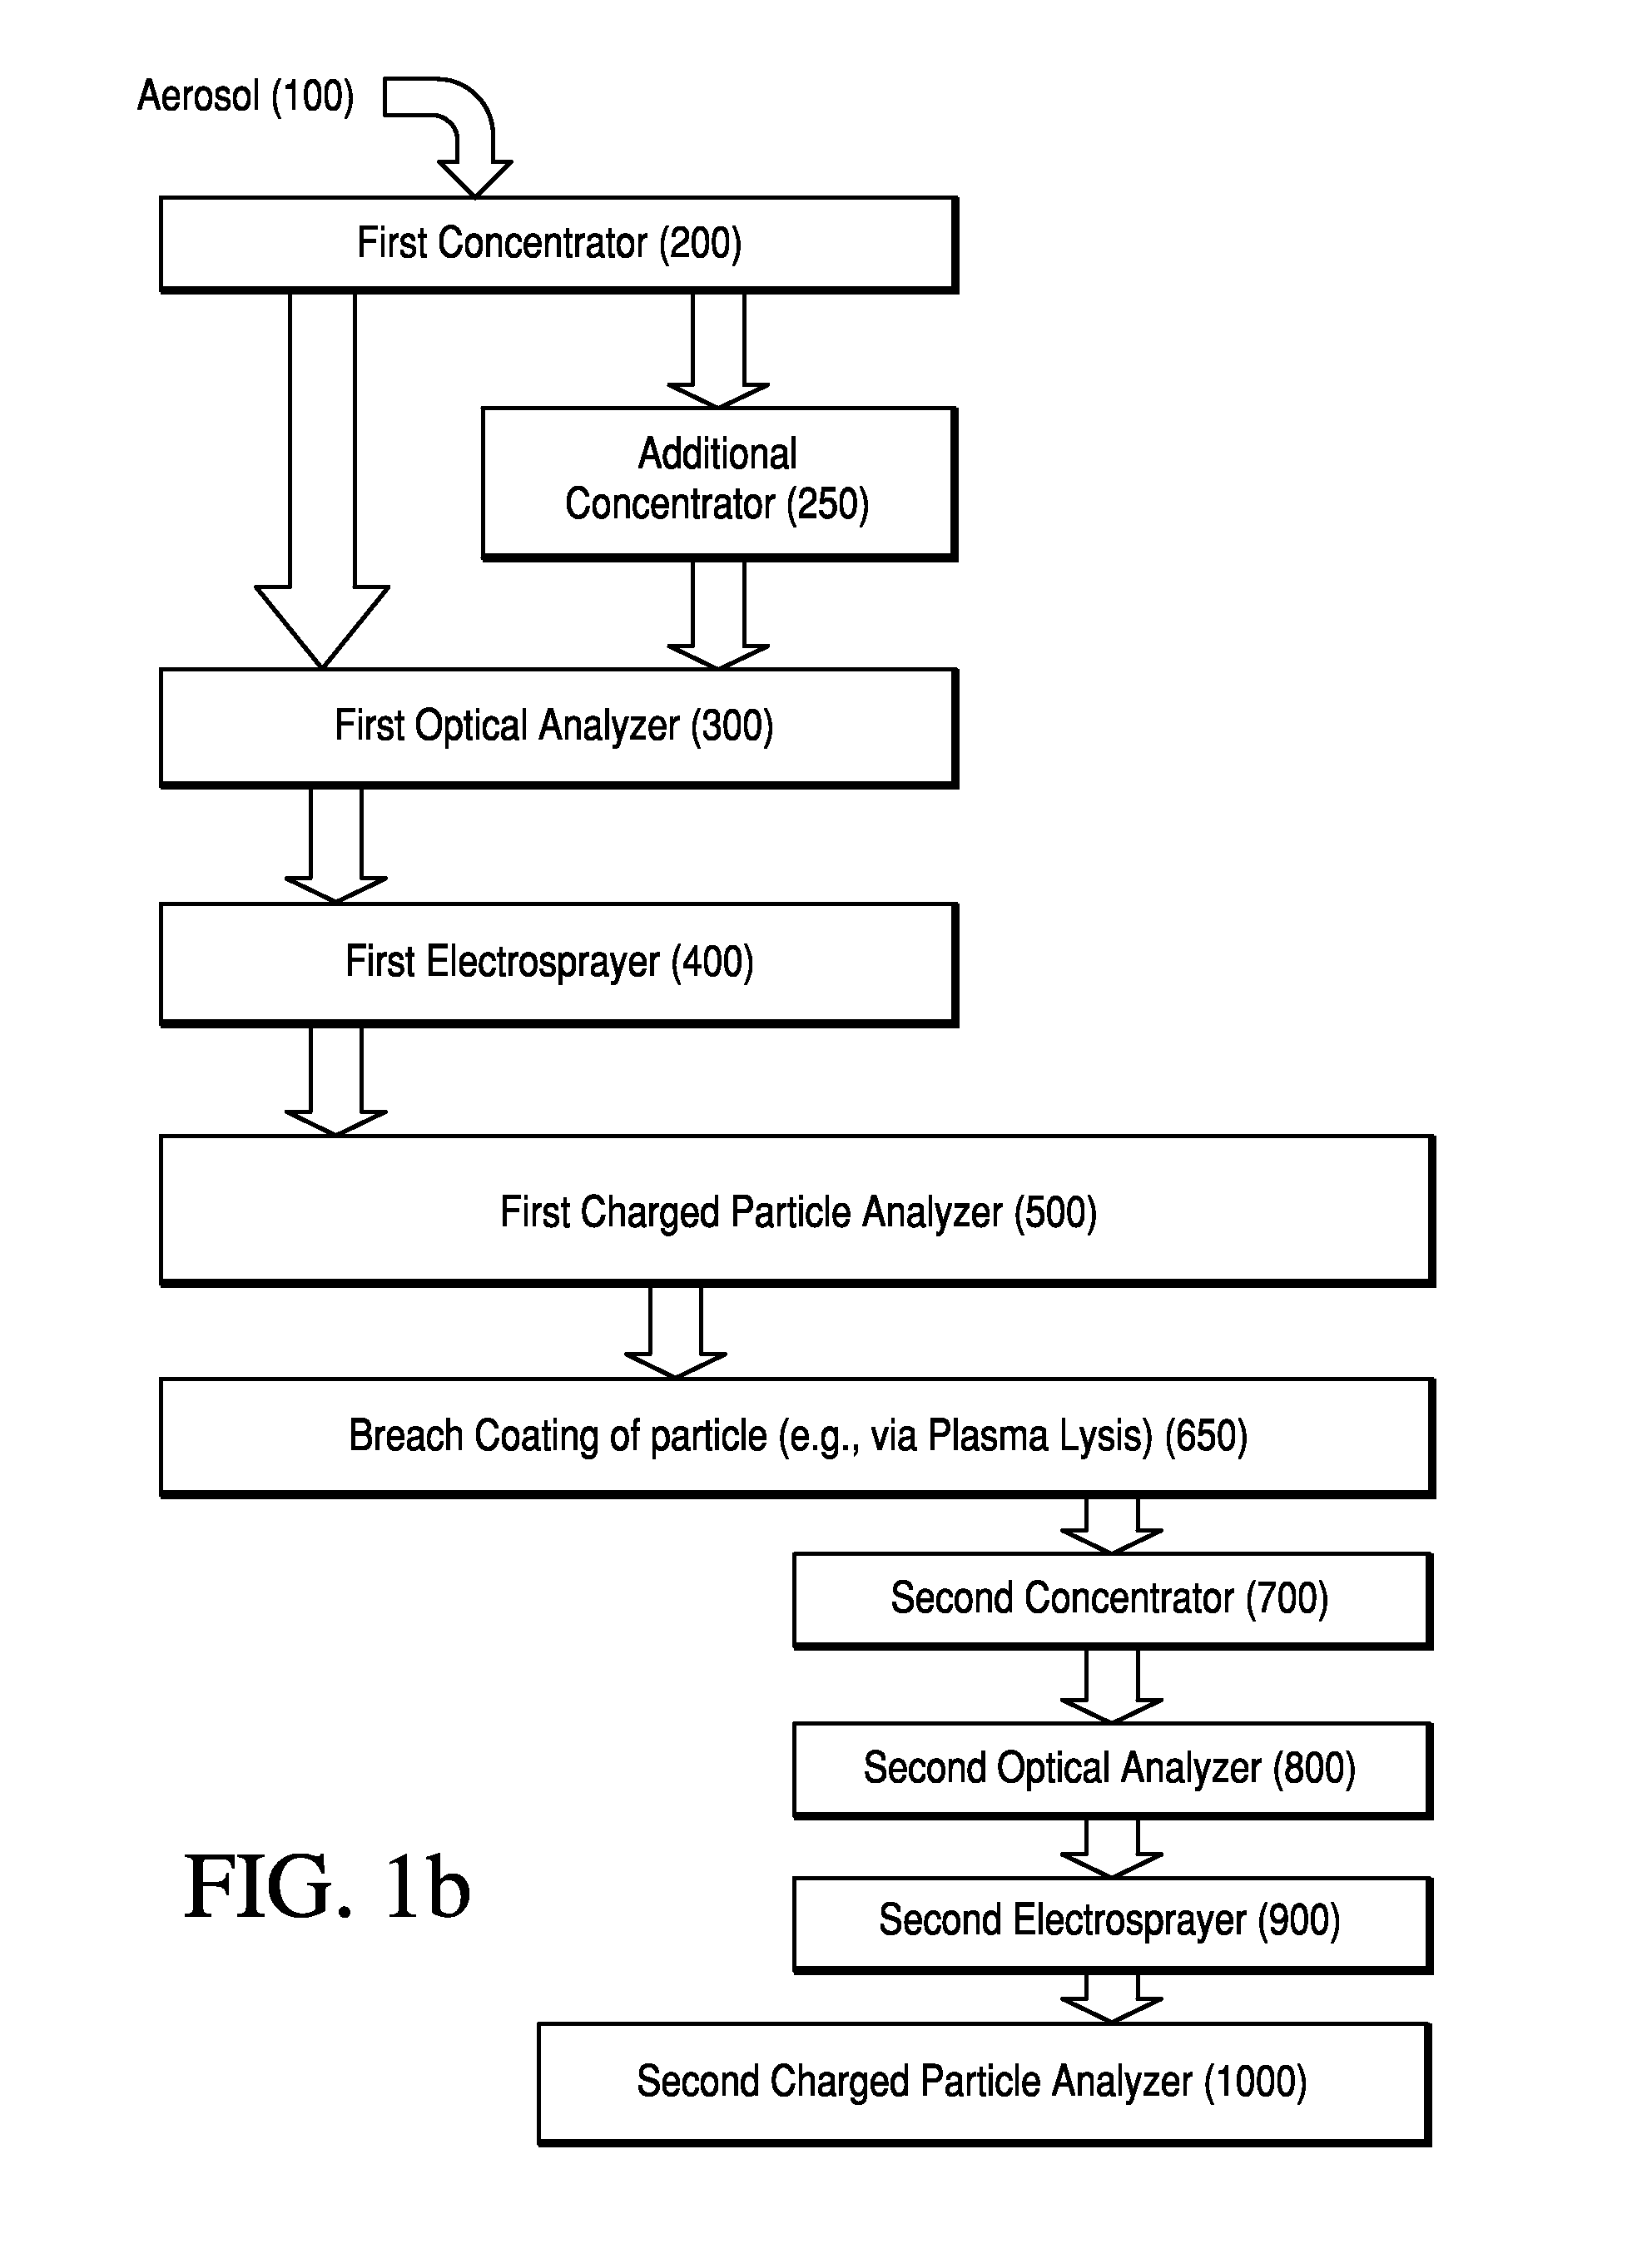 Method and apparatus for sorting and analyzing particles in an aerosol with redundant particle analysis